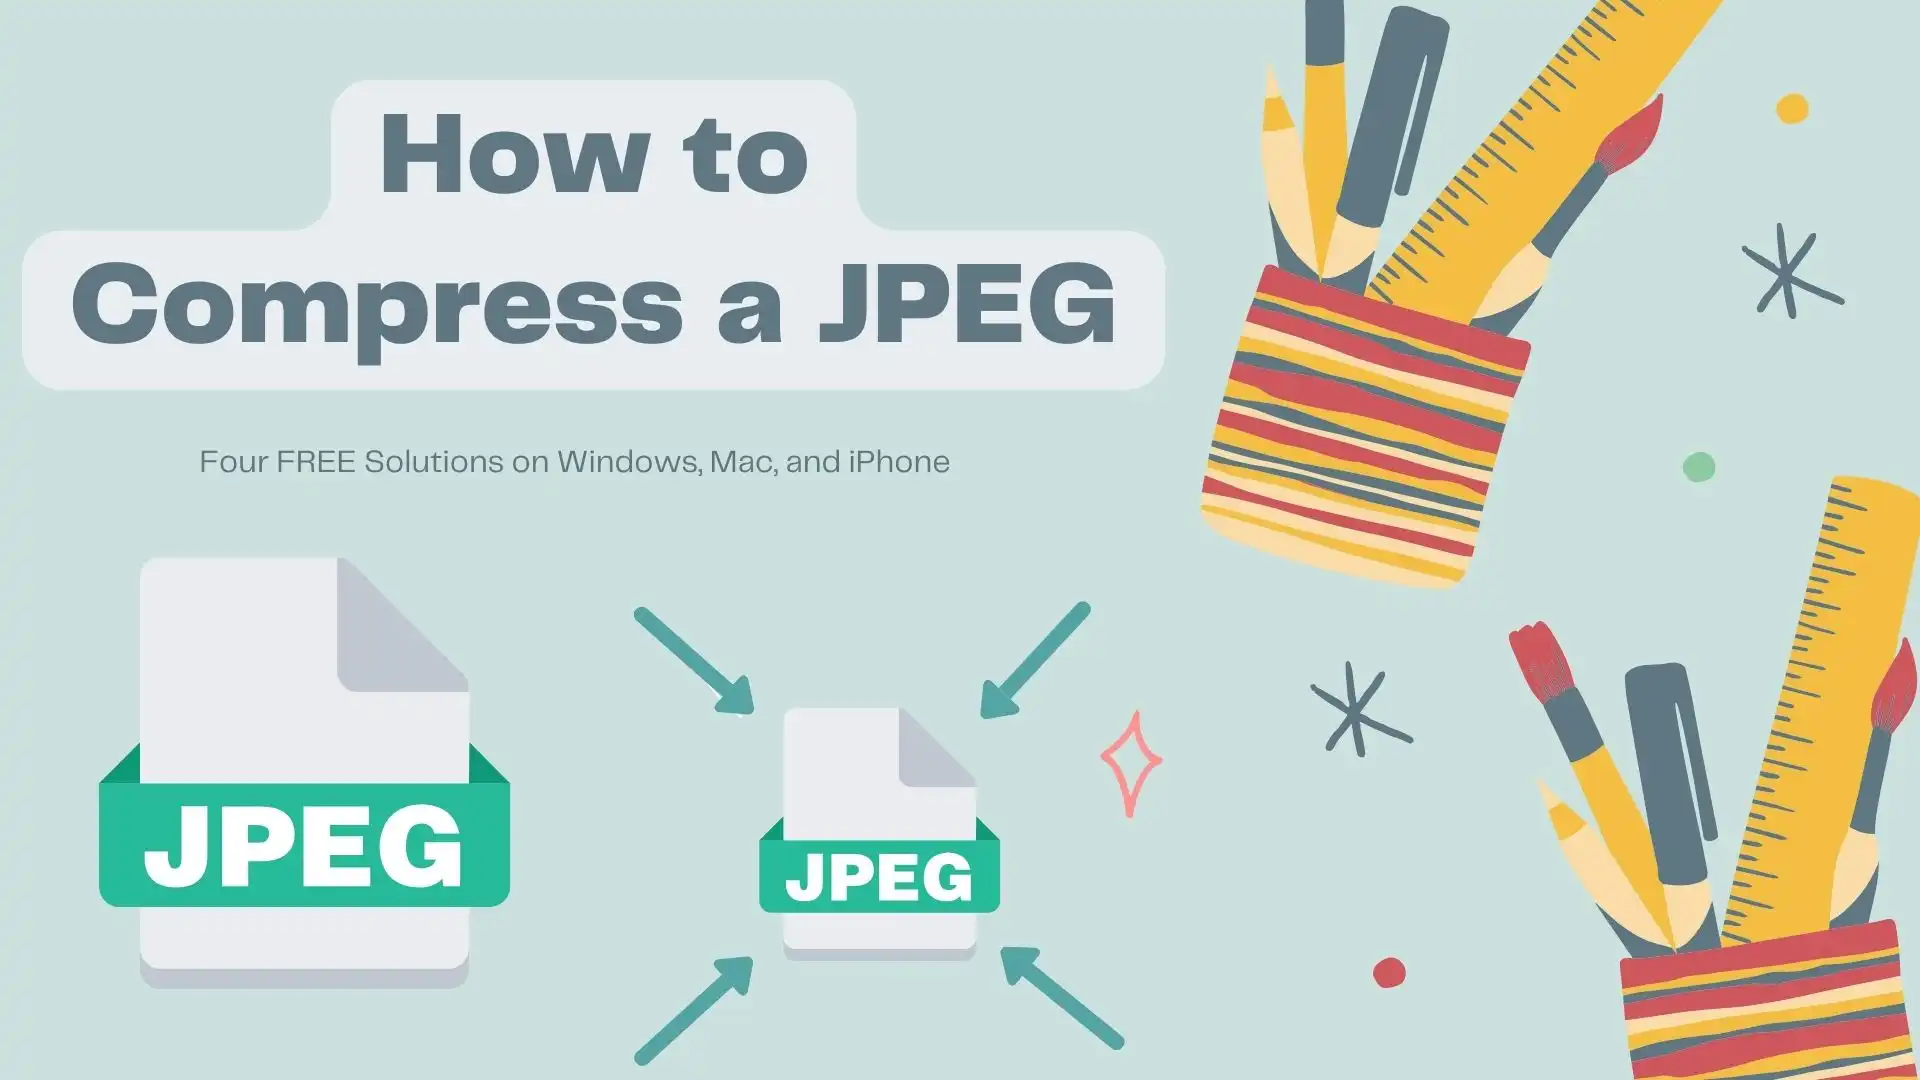 [Four FREE Solutions] How to Compress a JPEG on Windows/Mac/iPhone